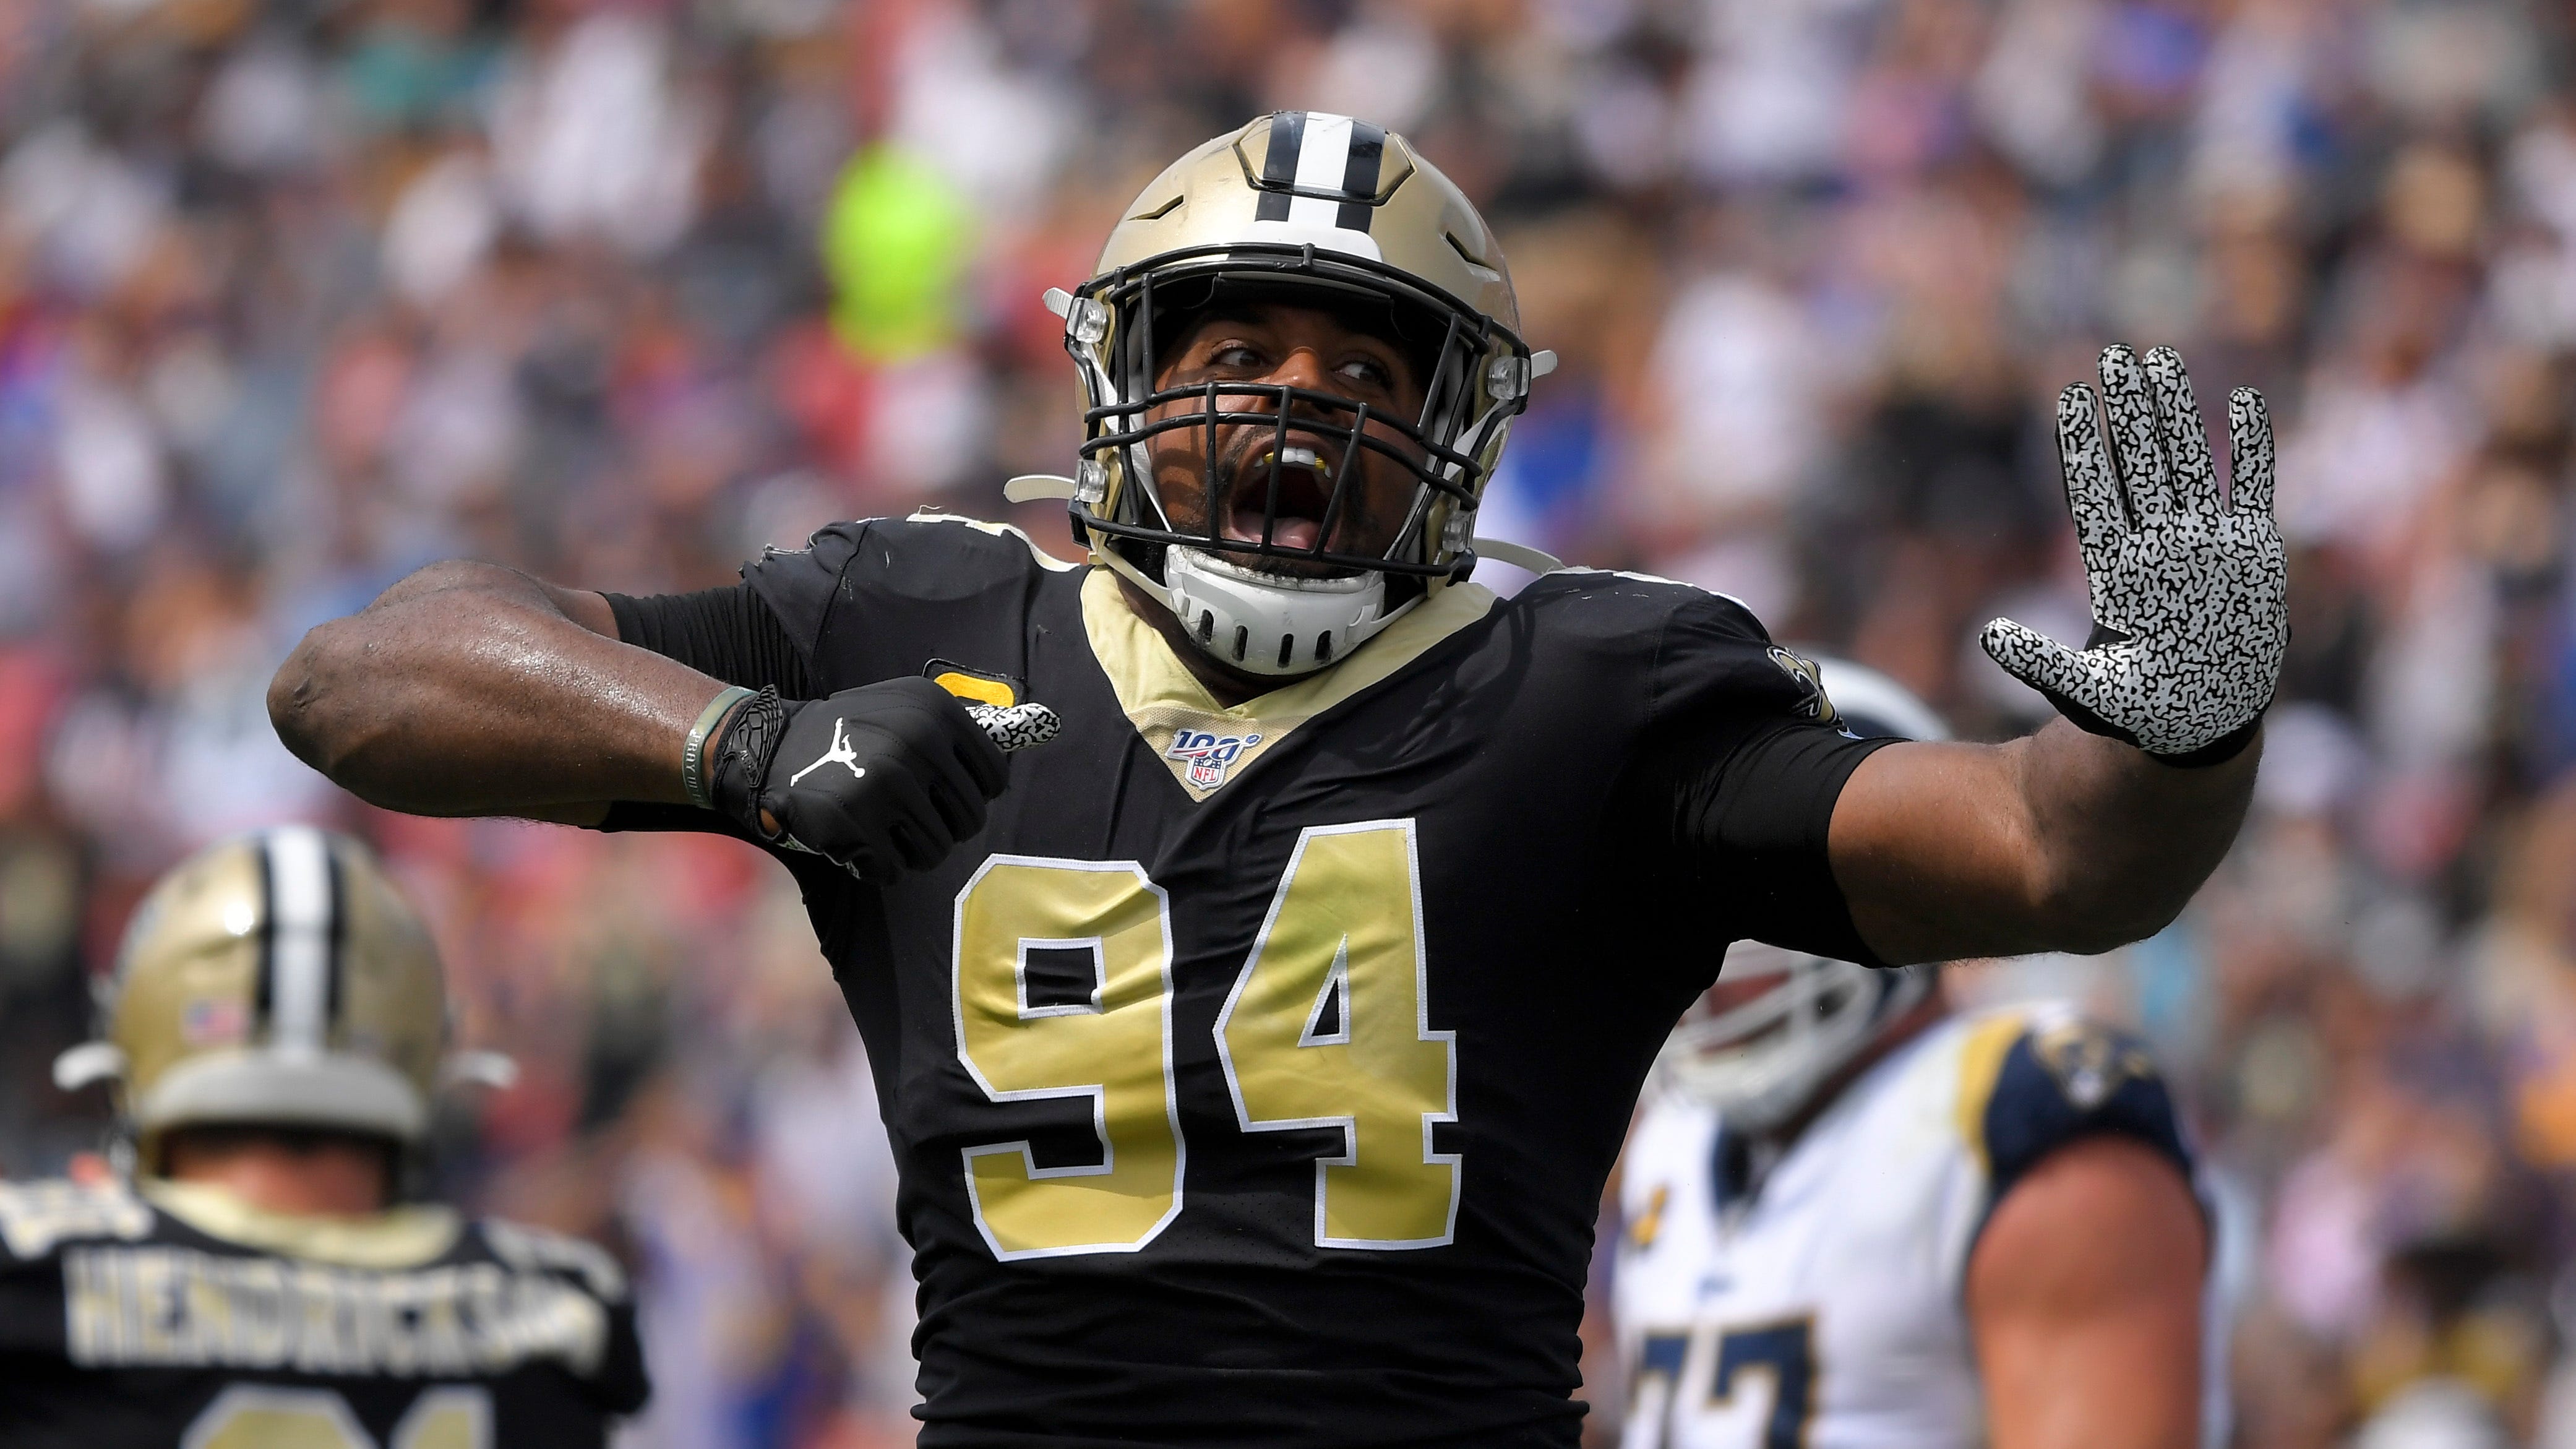 Cameron Jordan: 5 facts on the New 